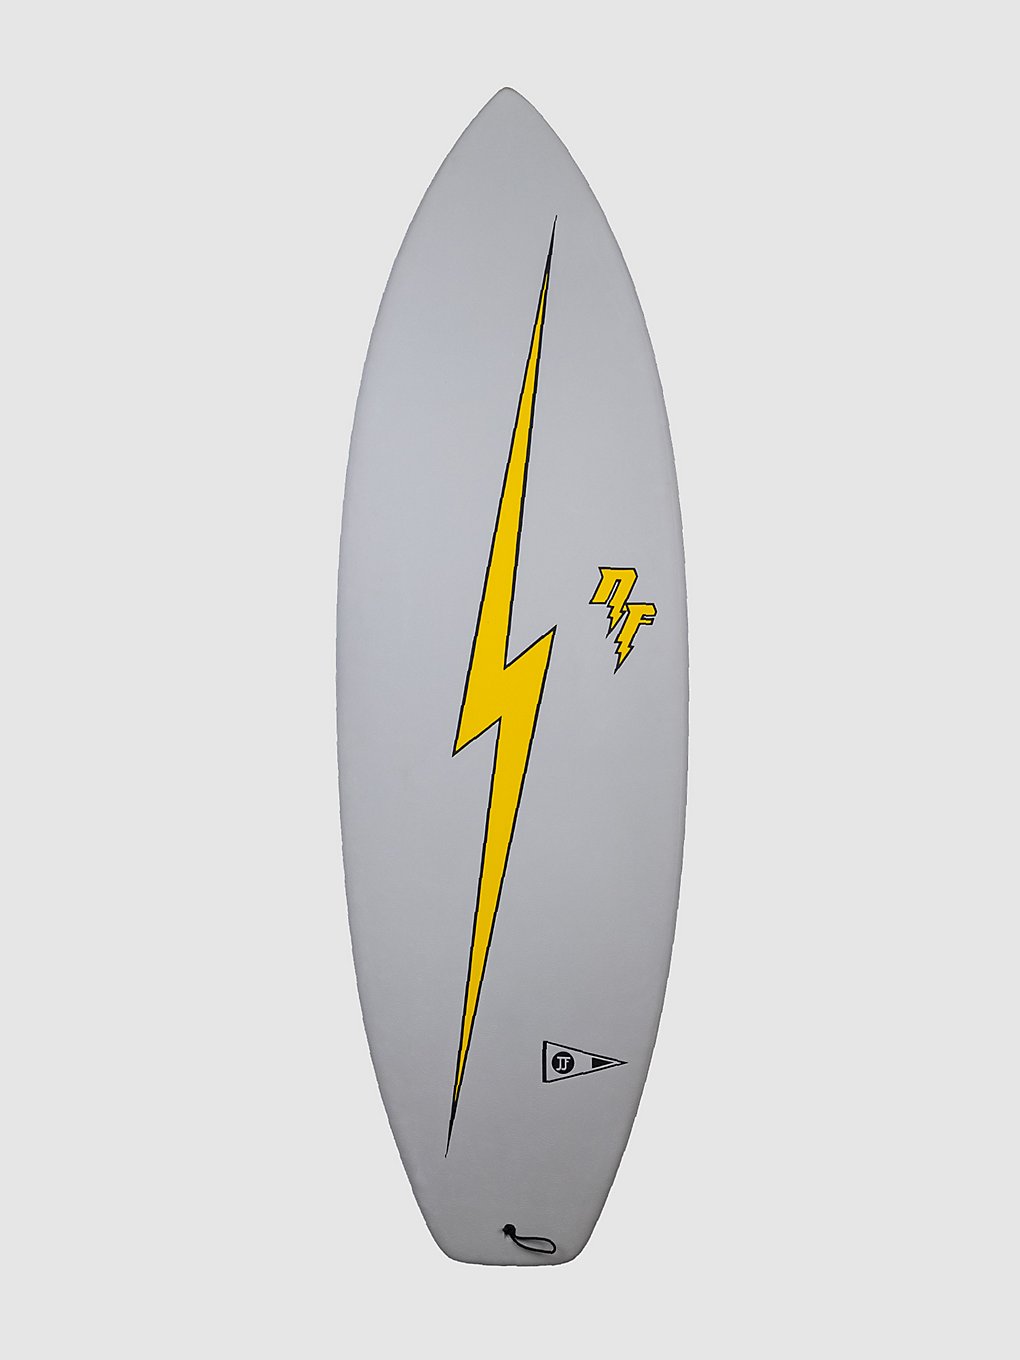 JJF by Pyzel Nathan Florence 5'9 Surfboard grijs